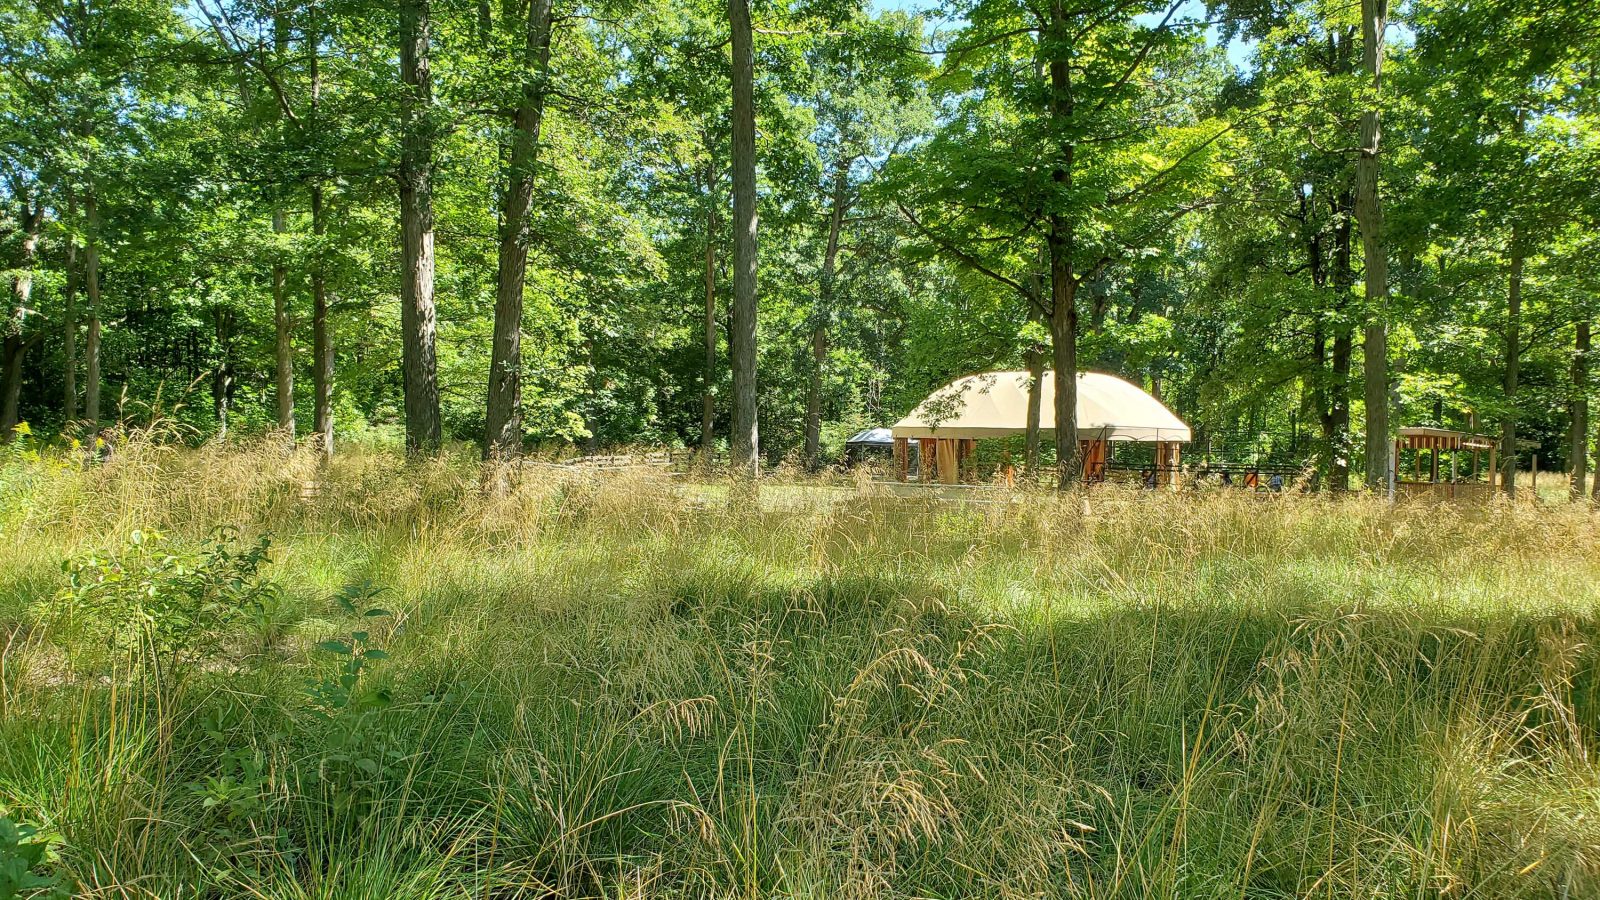 Long distance view of a large gazebo in the background, surrounded by trees, with tall, green grasses in the foreground.